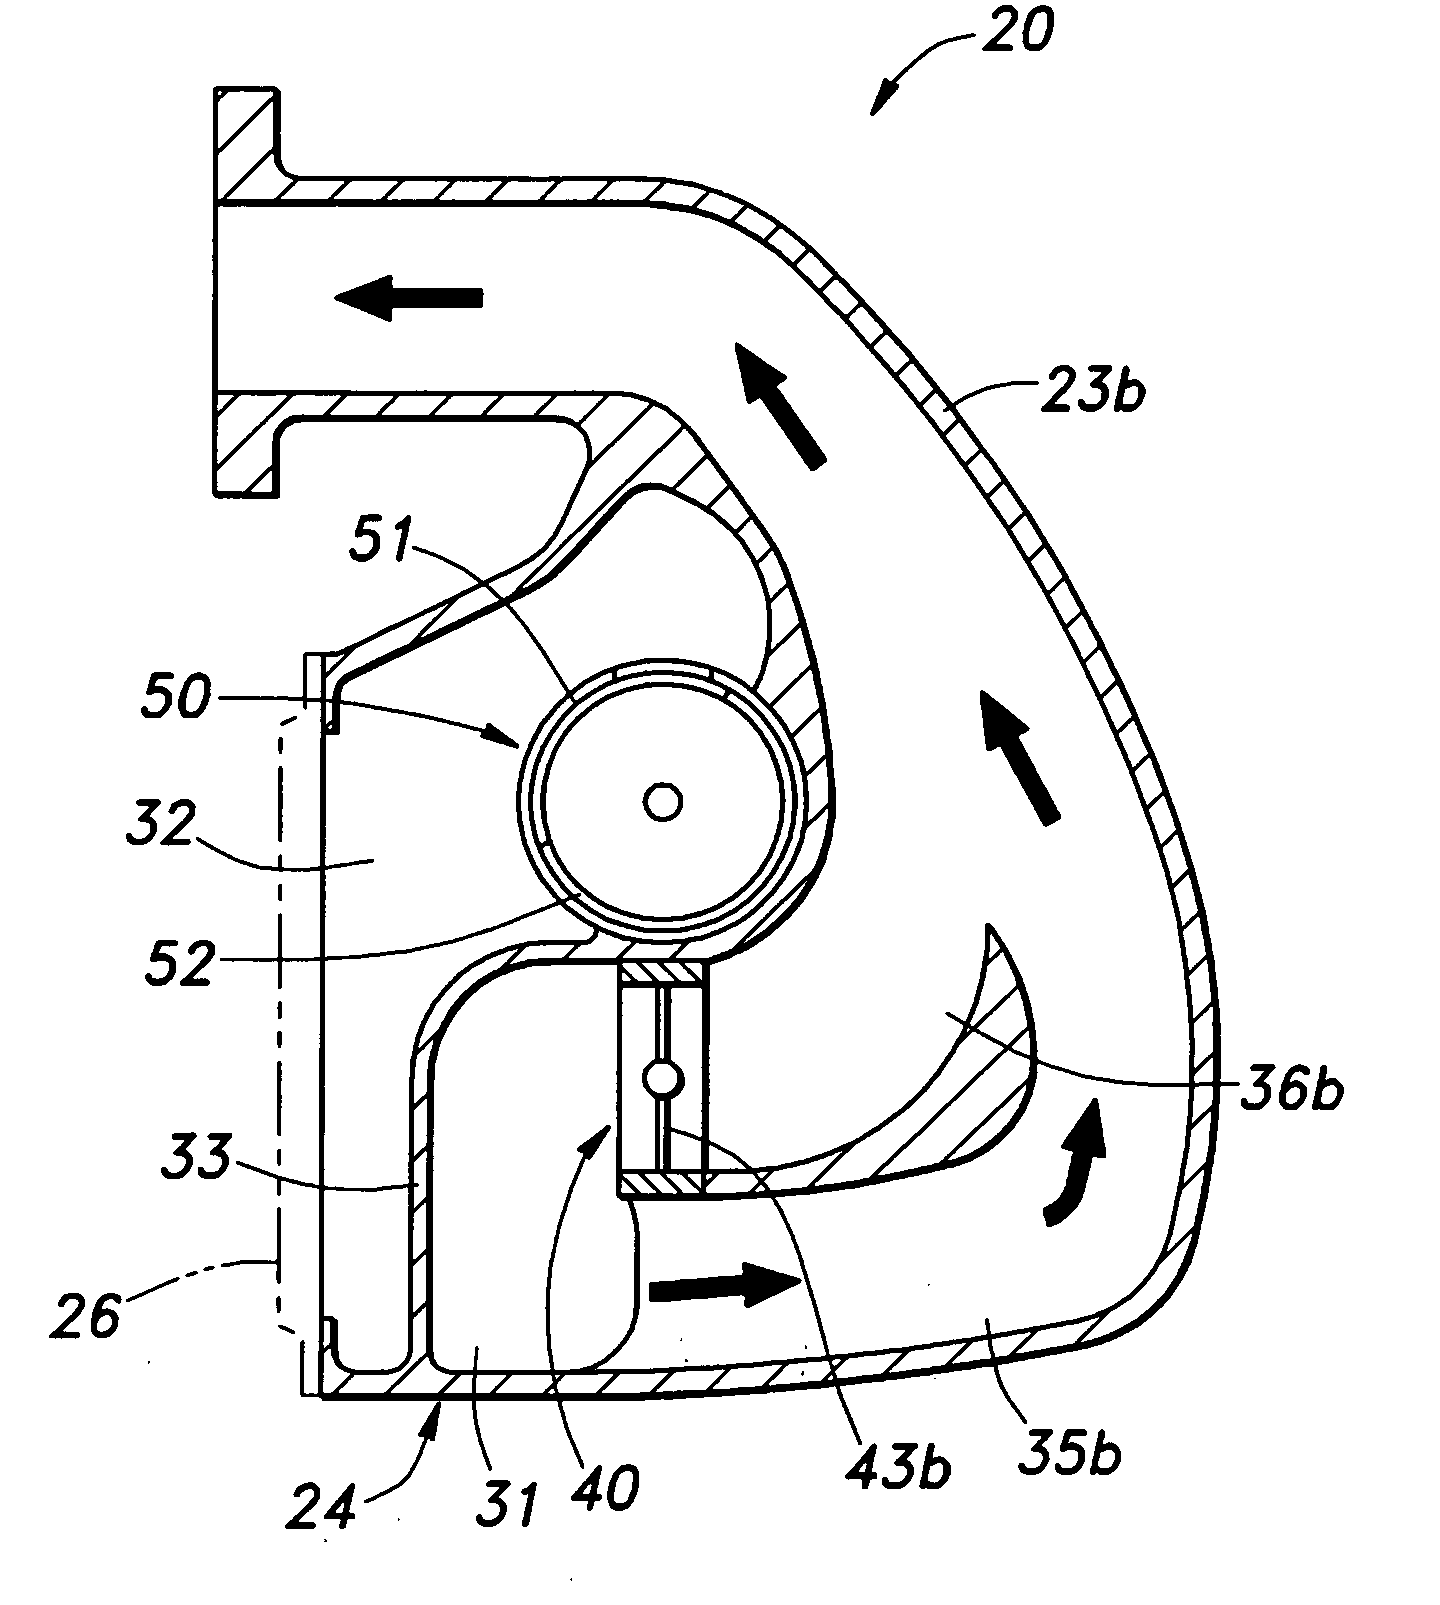 Intake system including a resonance chamber